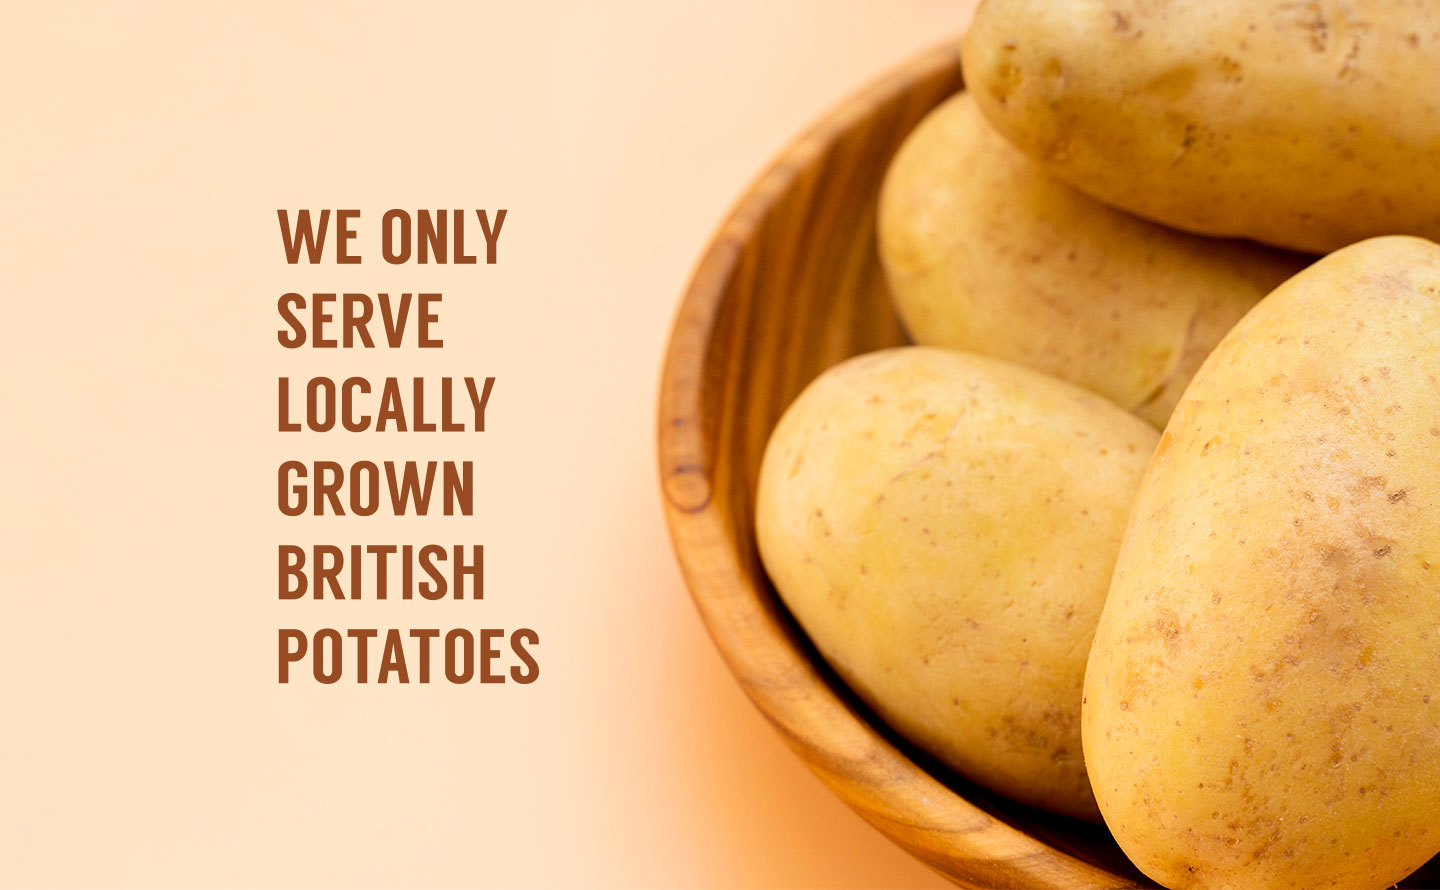 We Only Serve Locally Grown British Potatoes